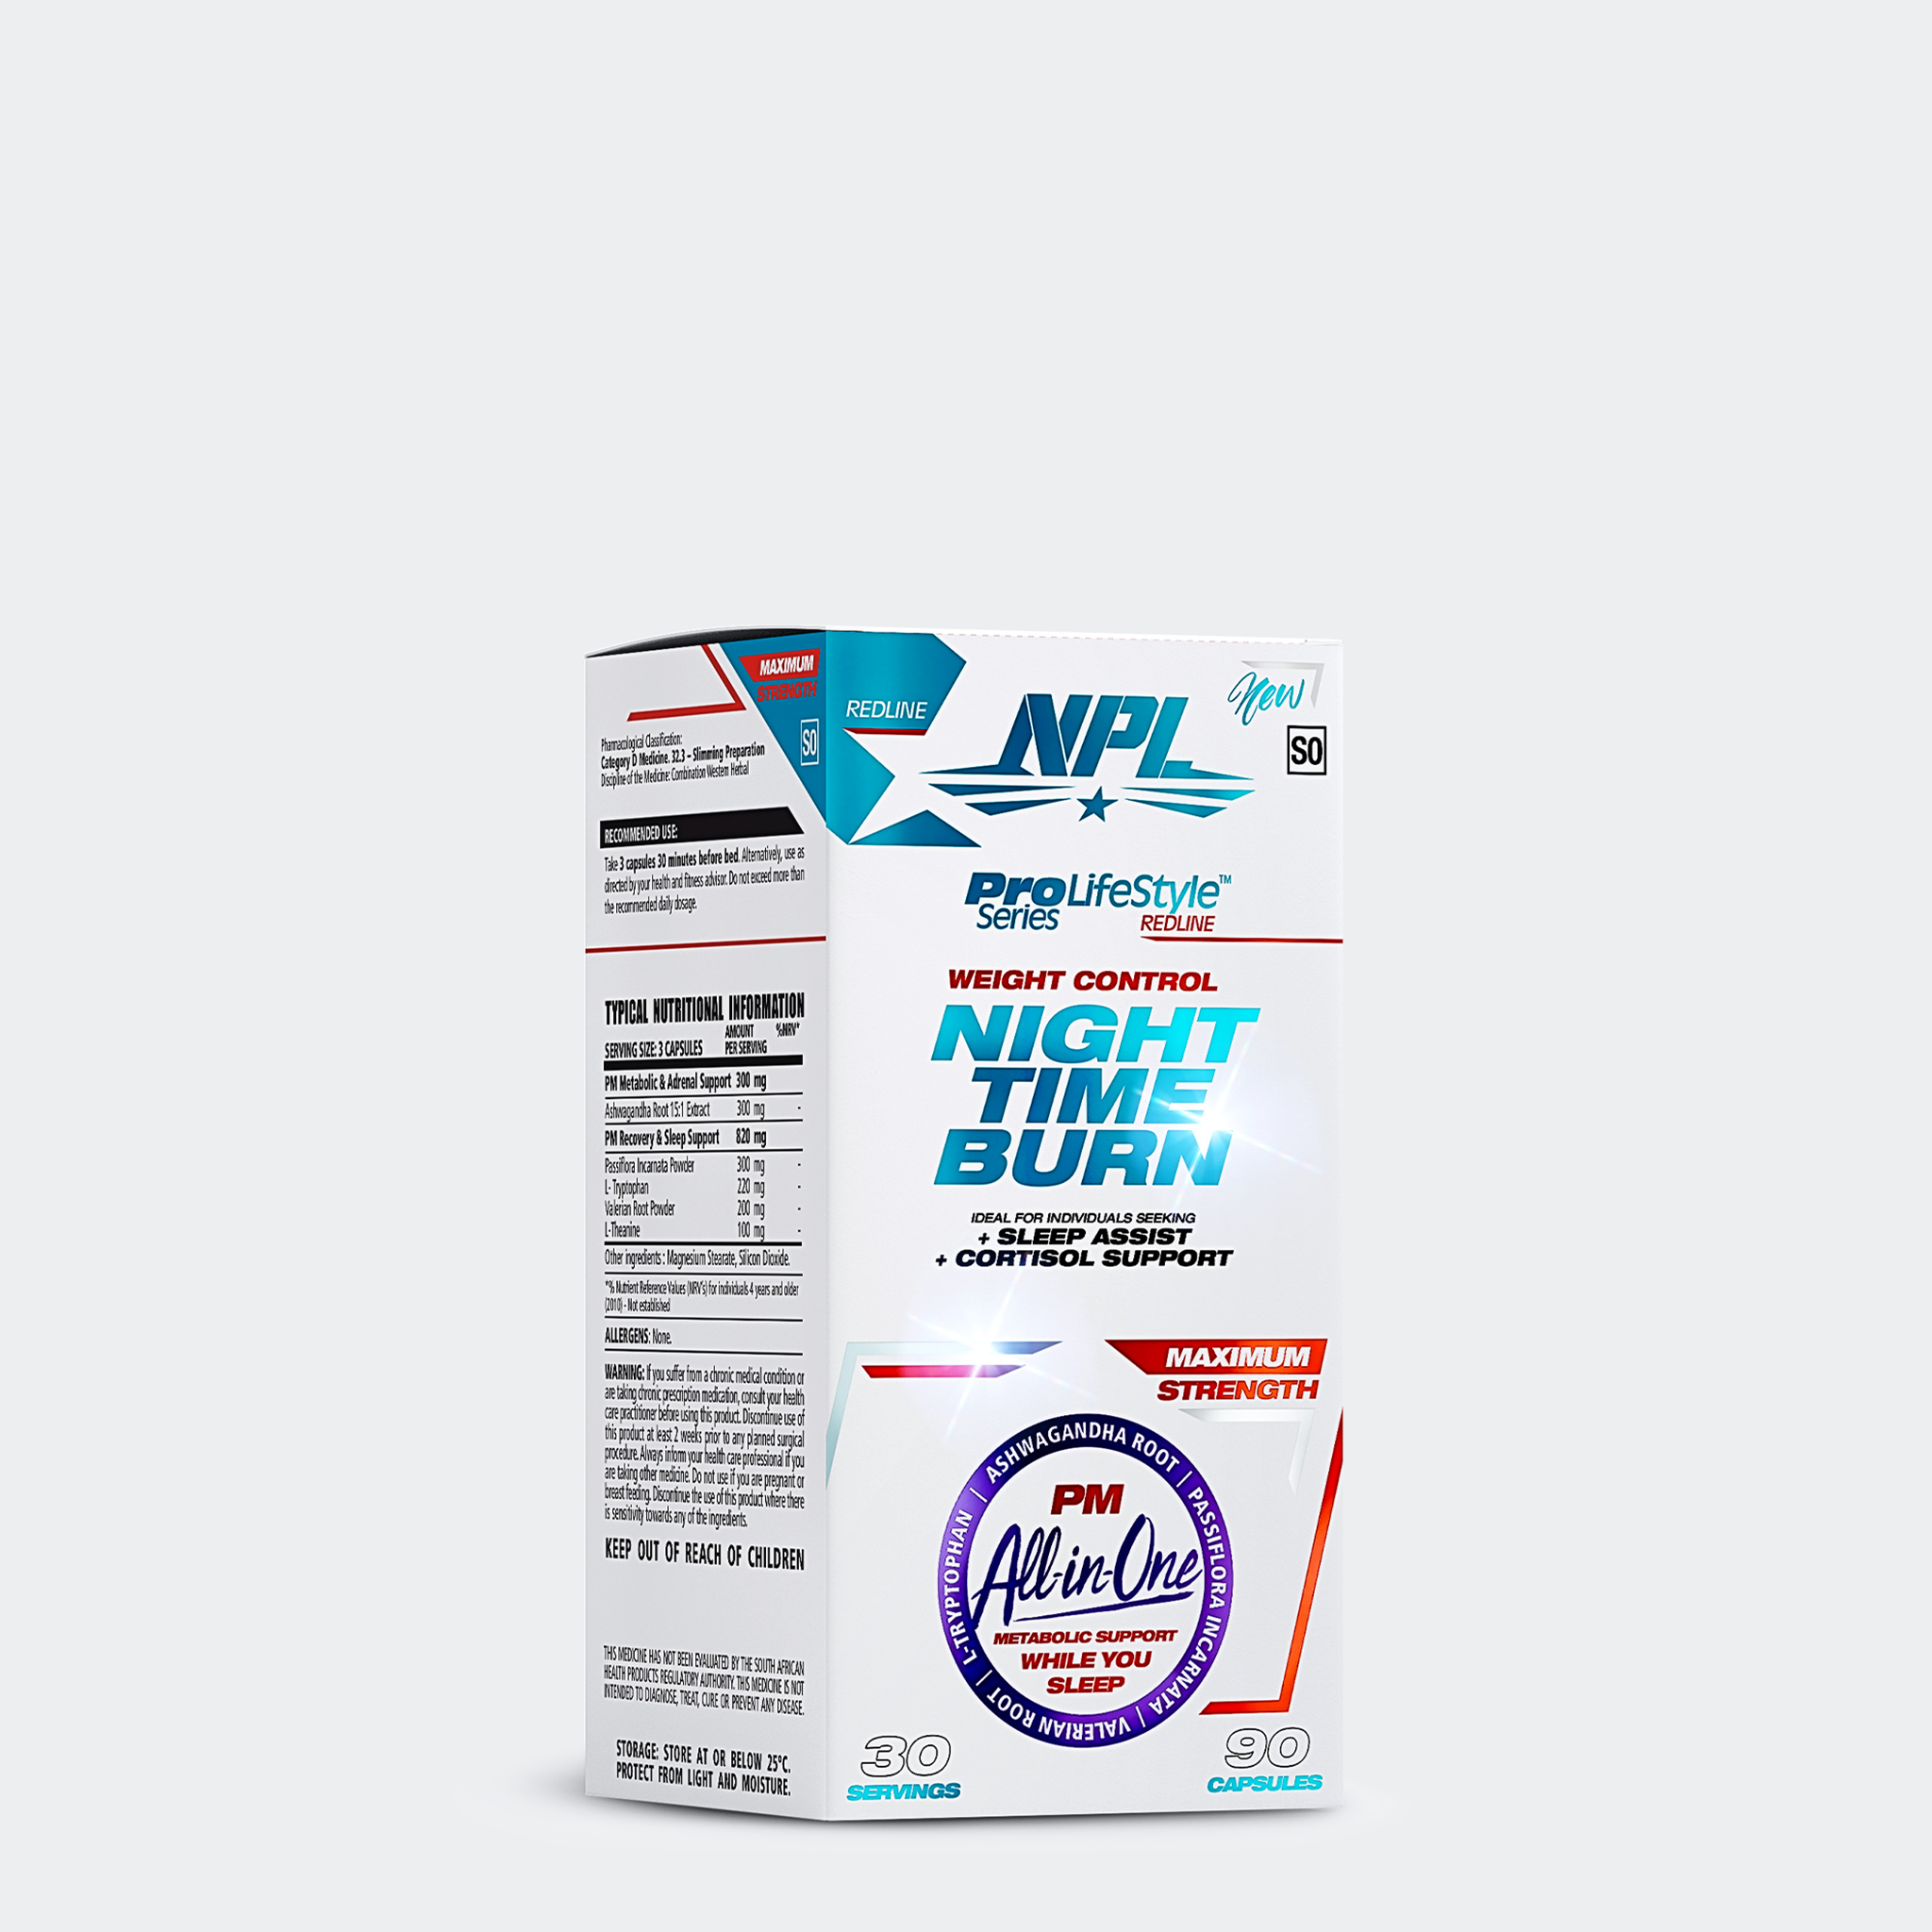 Night time burn is an Effective and innovative weight management supplement that works while you sleep